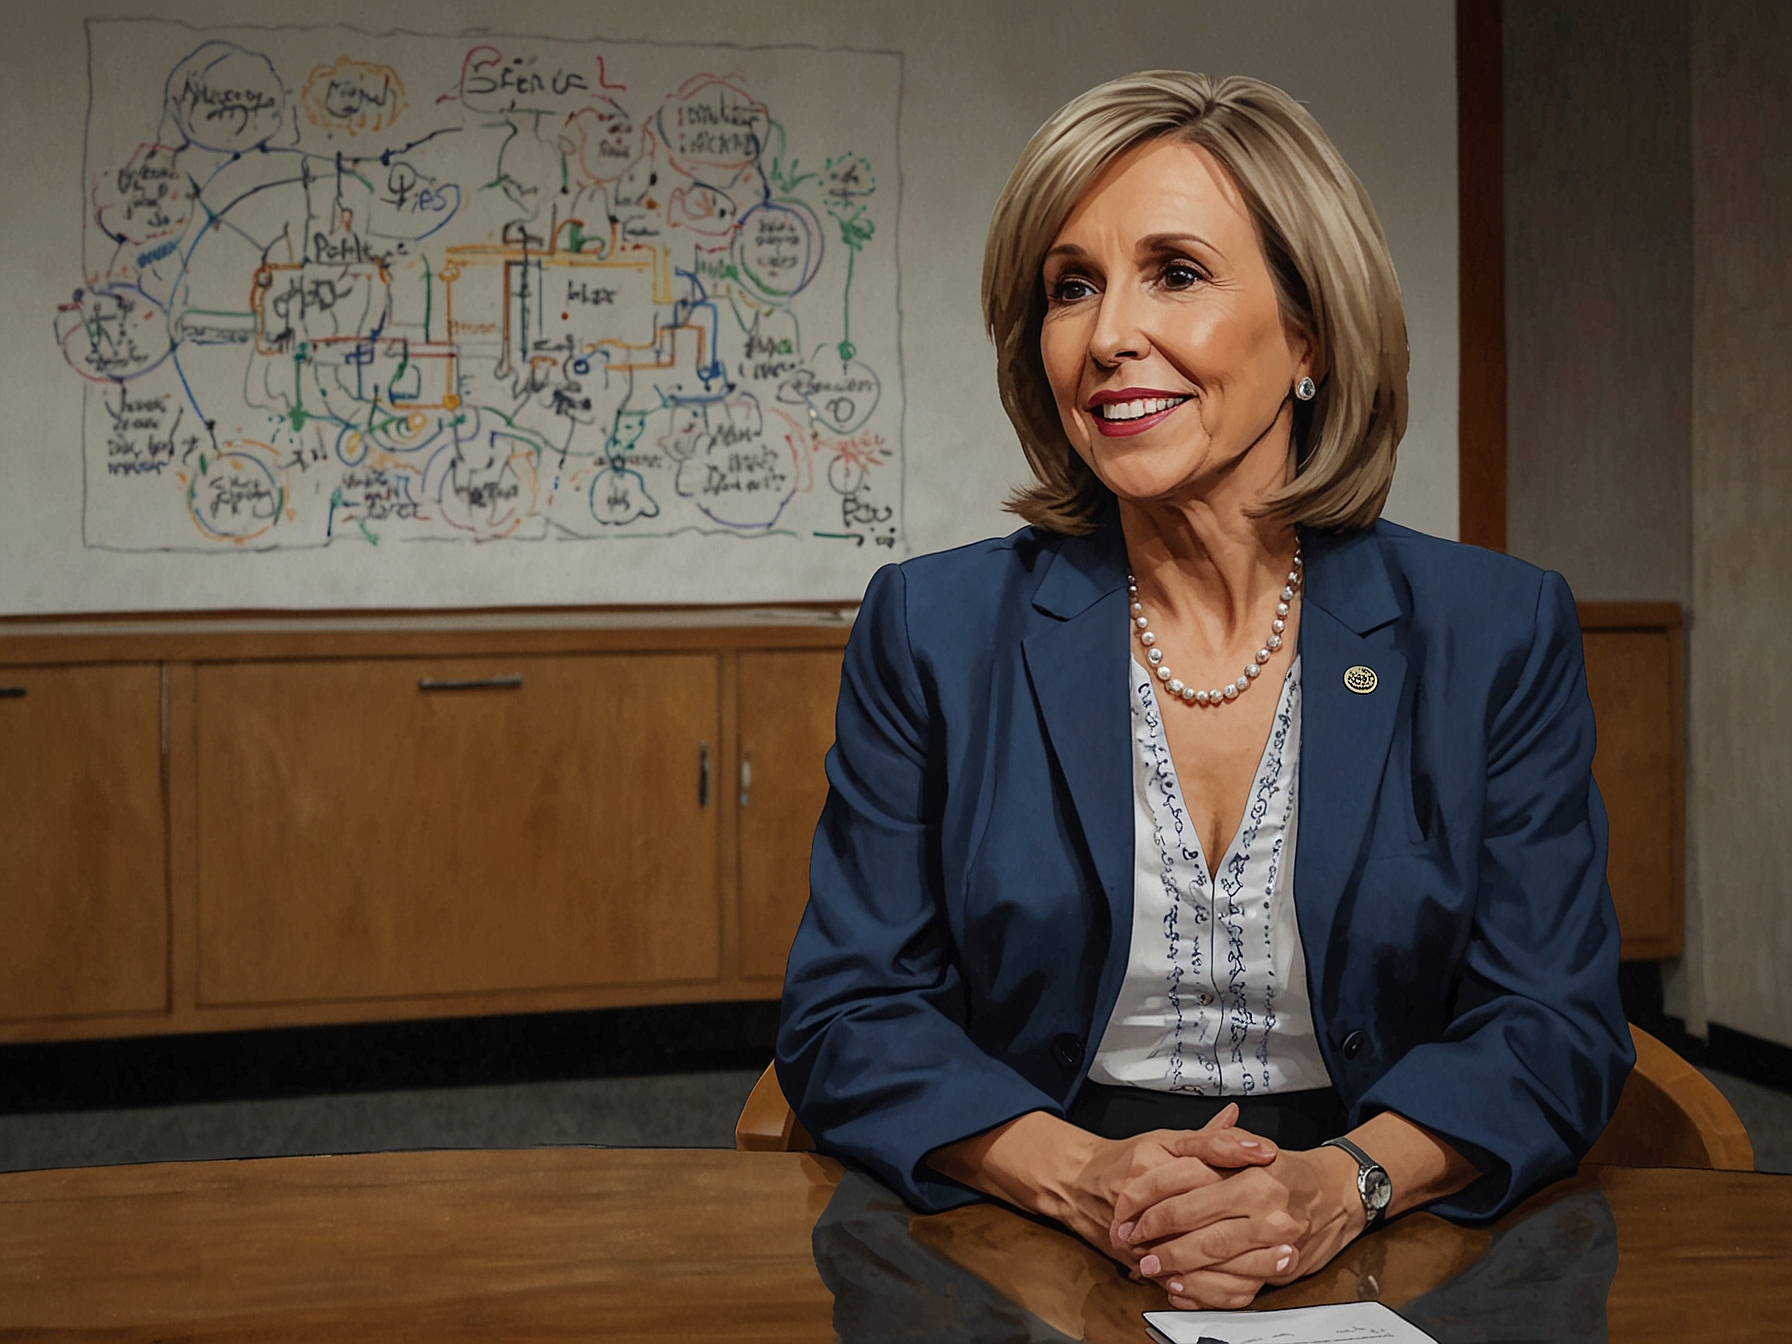 Governor Michelle Lujan Grisham discusses educational reforms and economic initiatives in New Mexico, highlighting preschool funding and clean energy projects during her interview with Margaret Brennan.